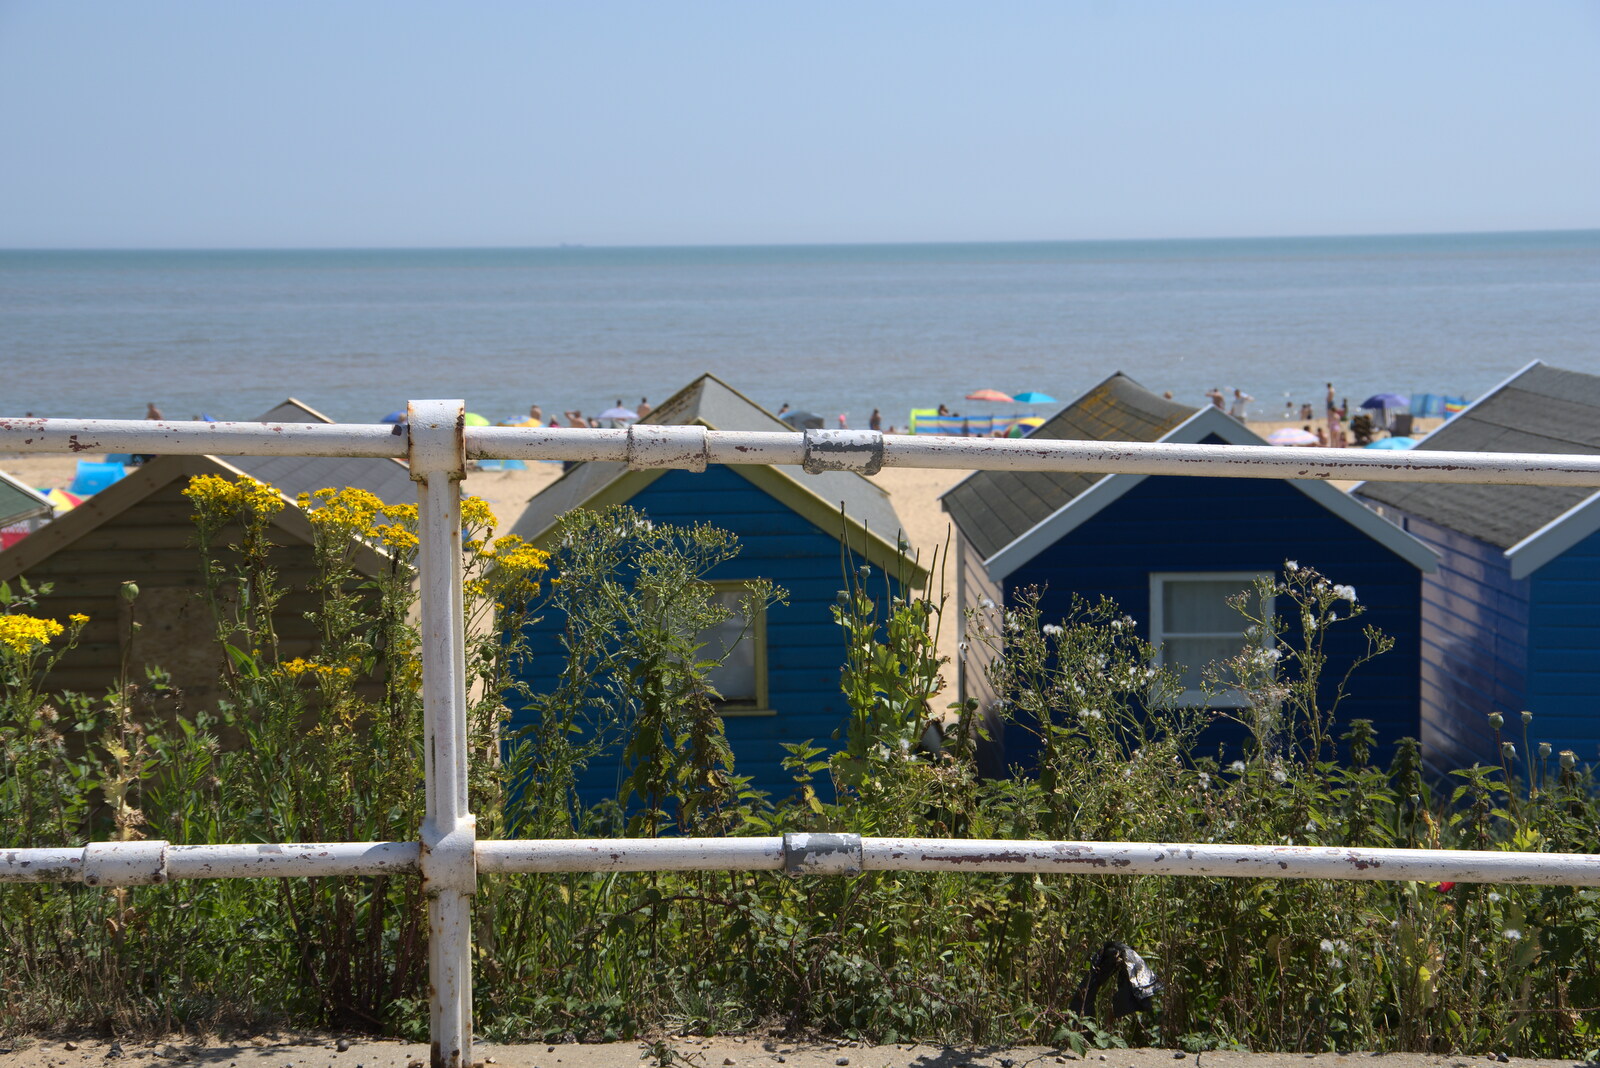 Beach huts from A Day on the Beach, Southwold, Suffolk - 18th July 2021